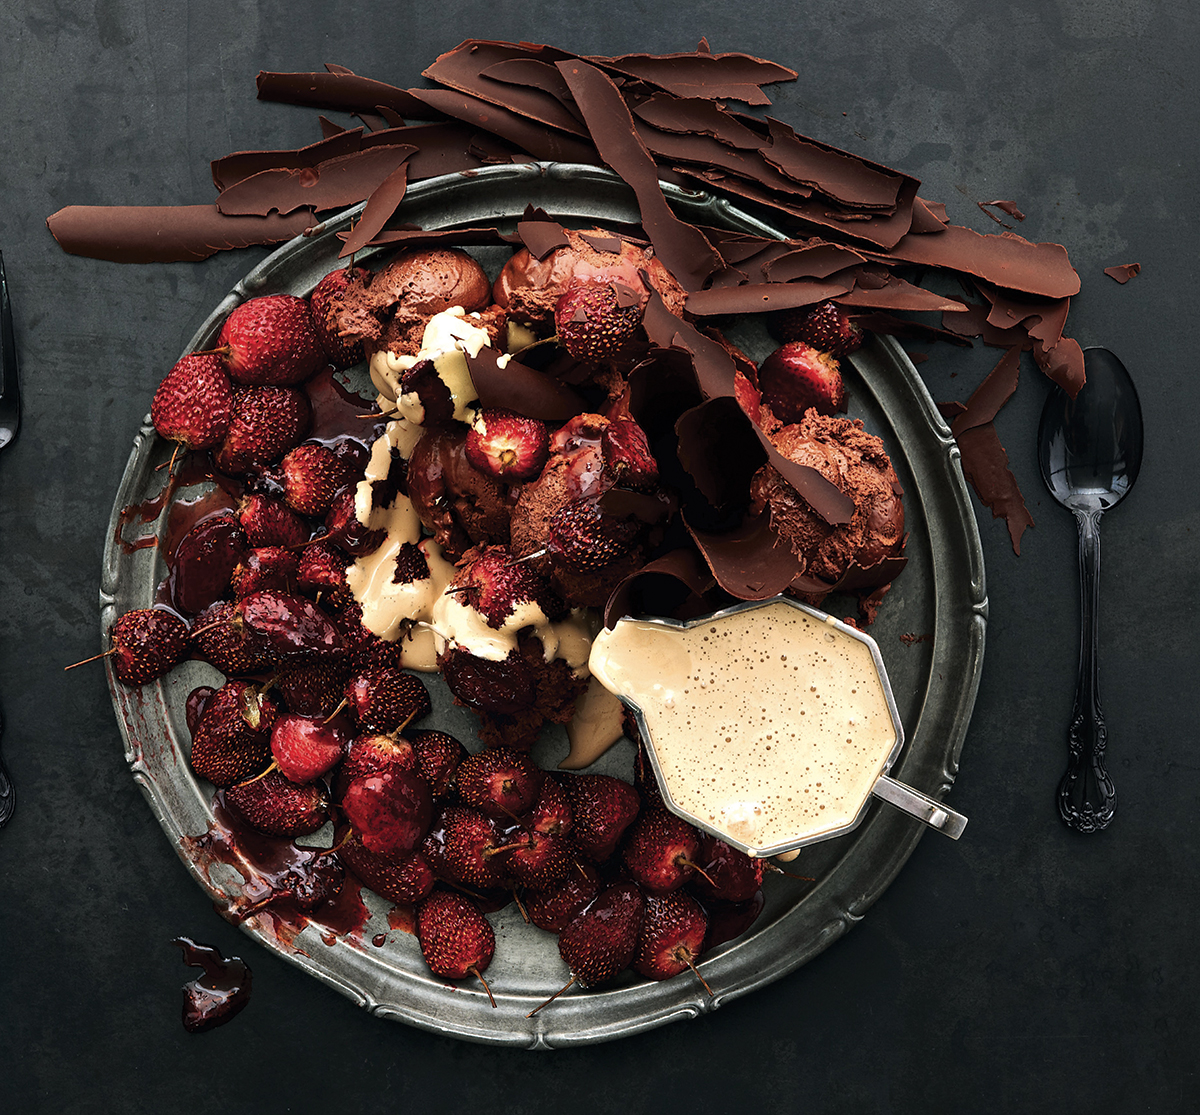 chocolate-mousse-espresso-sabayon-with-slow-roasted-strawberries-and-chocolate-shards